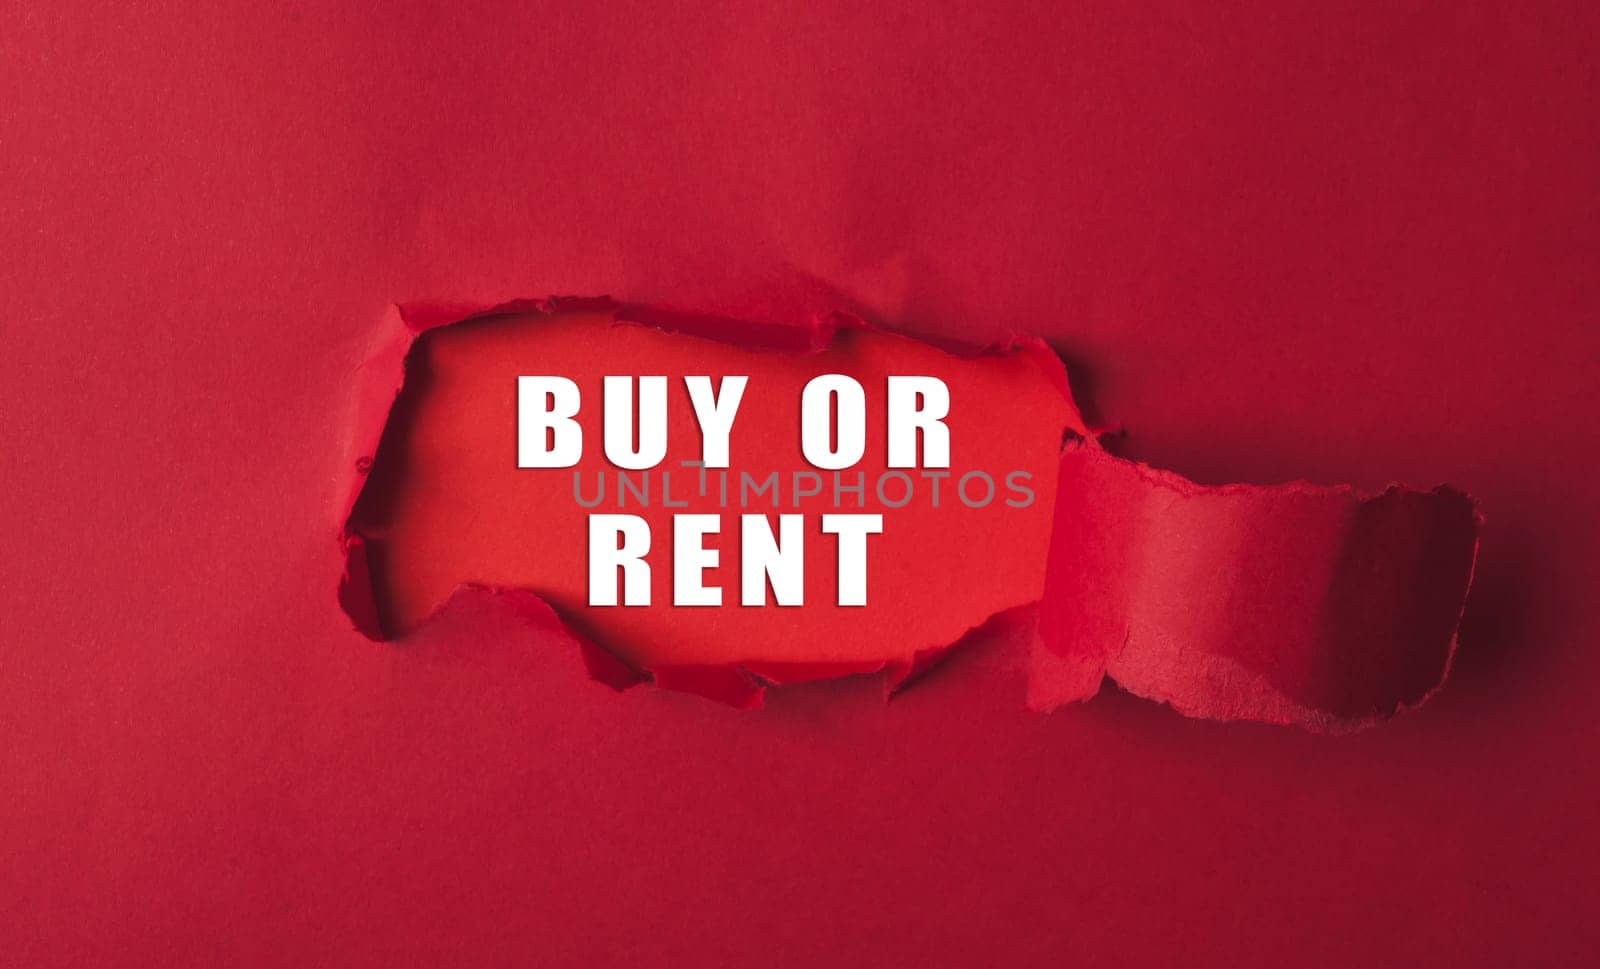 A red background with a white word that says buy or rent. The word is written in a way that it looks like it's peeling off the paper